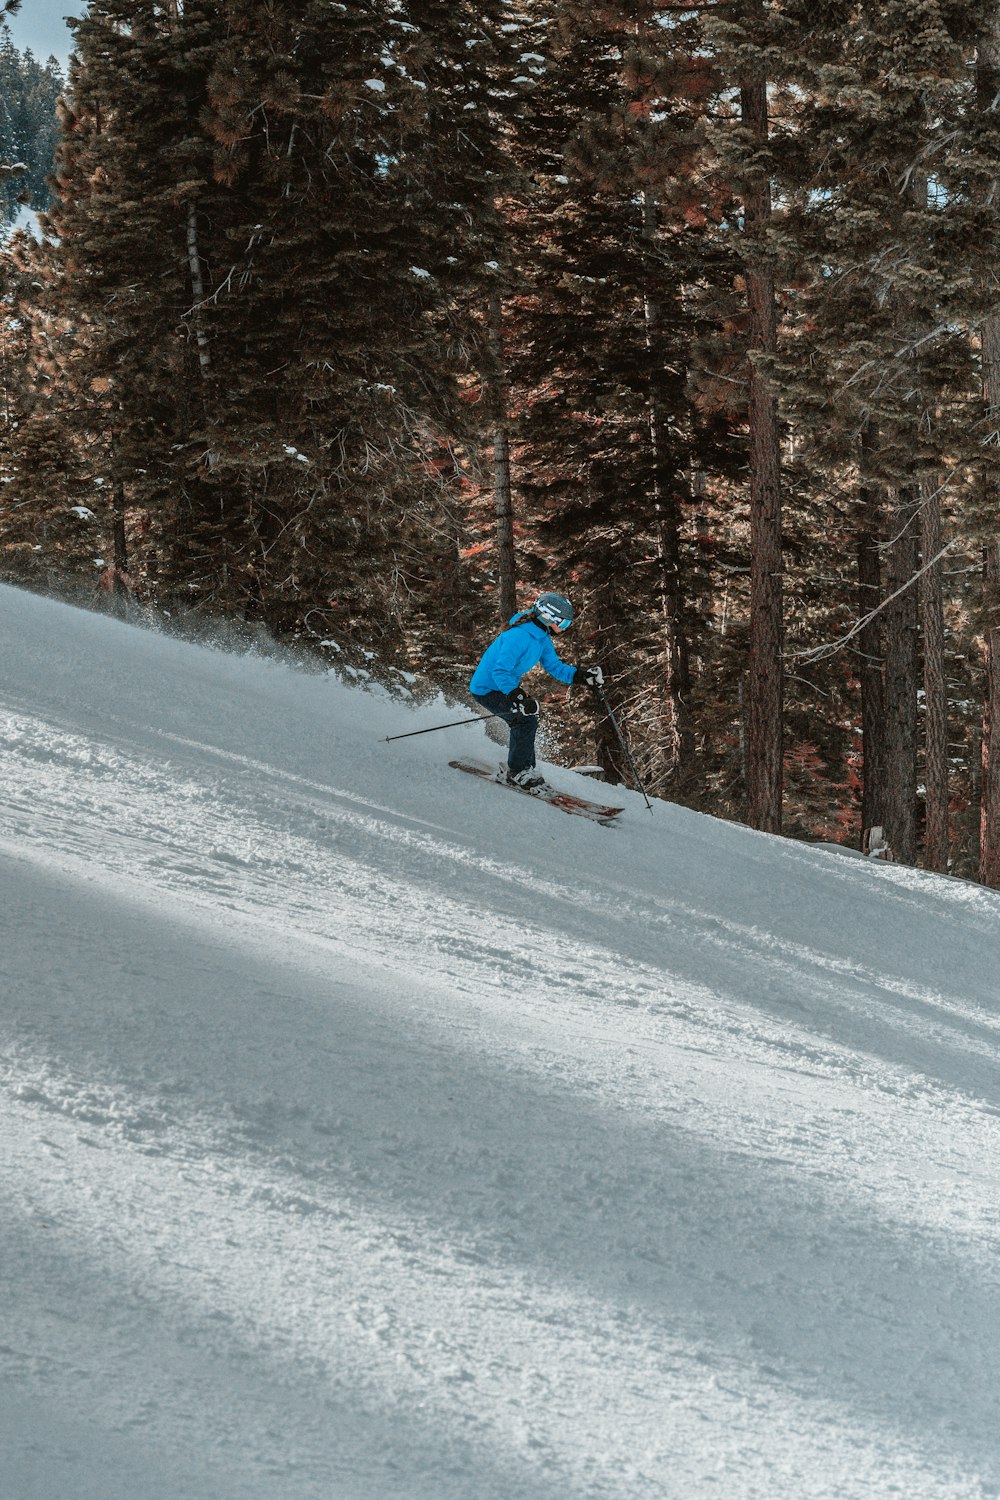 man in blue jacket and black pants riding ski blades on snow covered ground during daytime